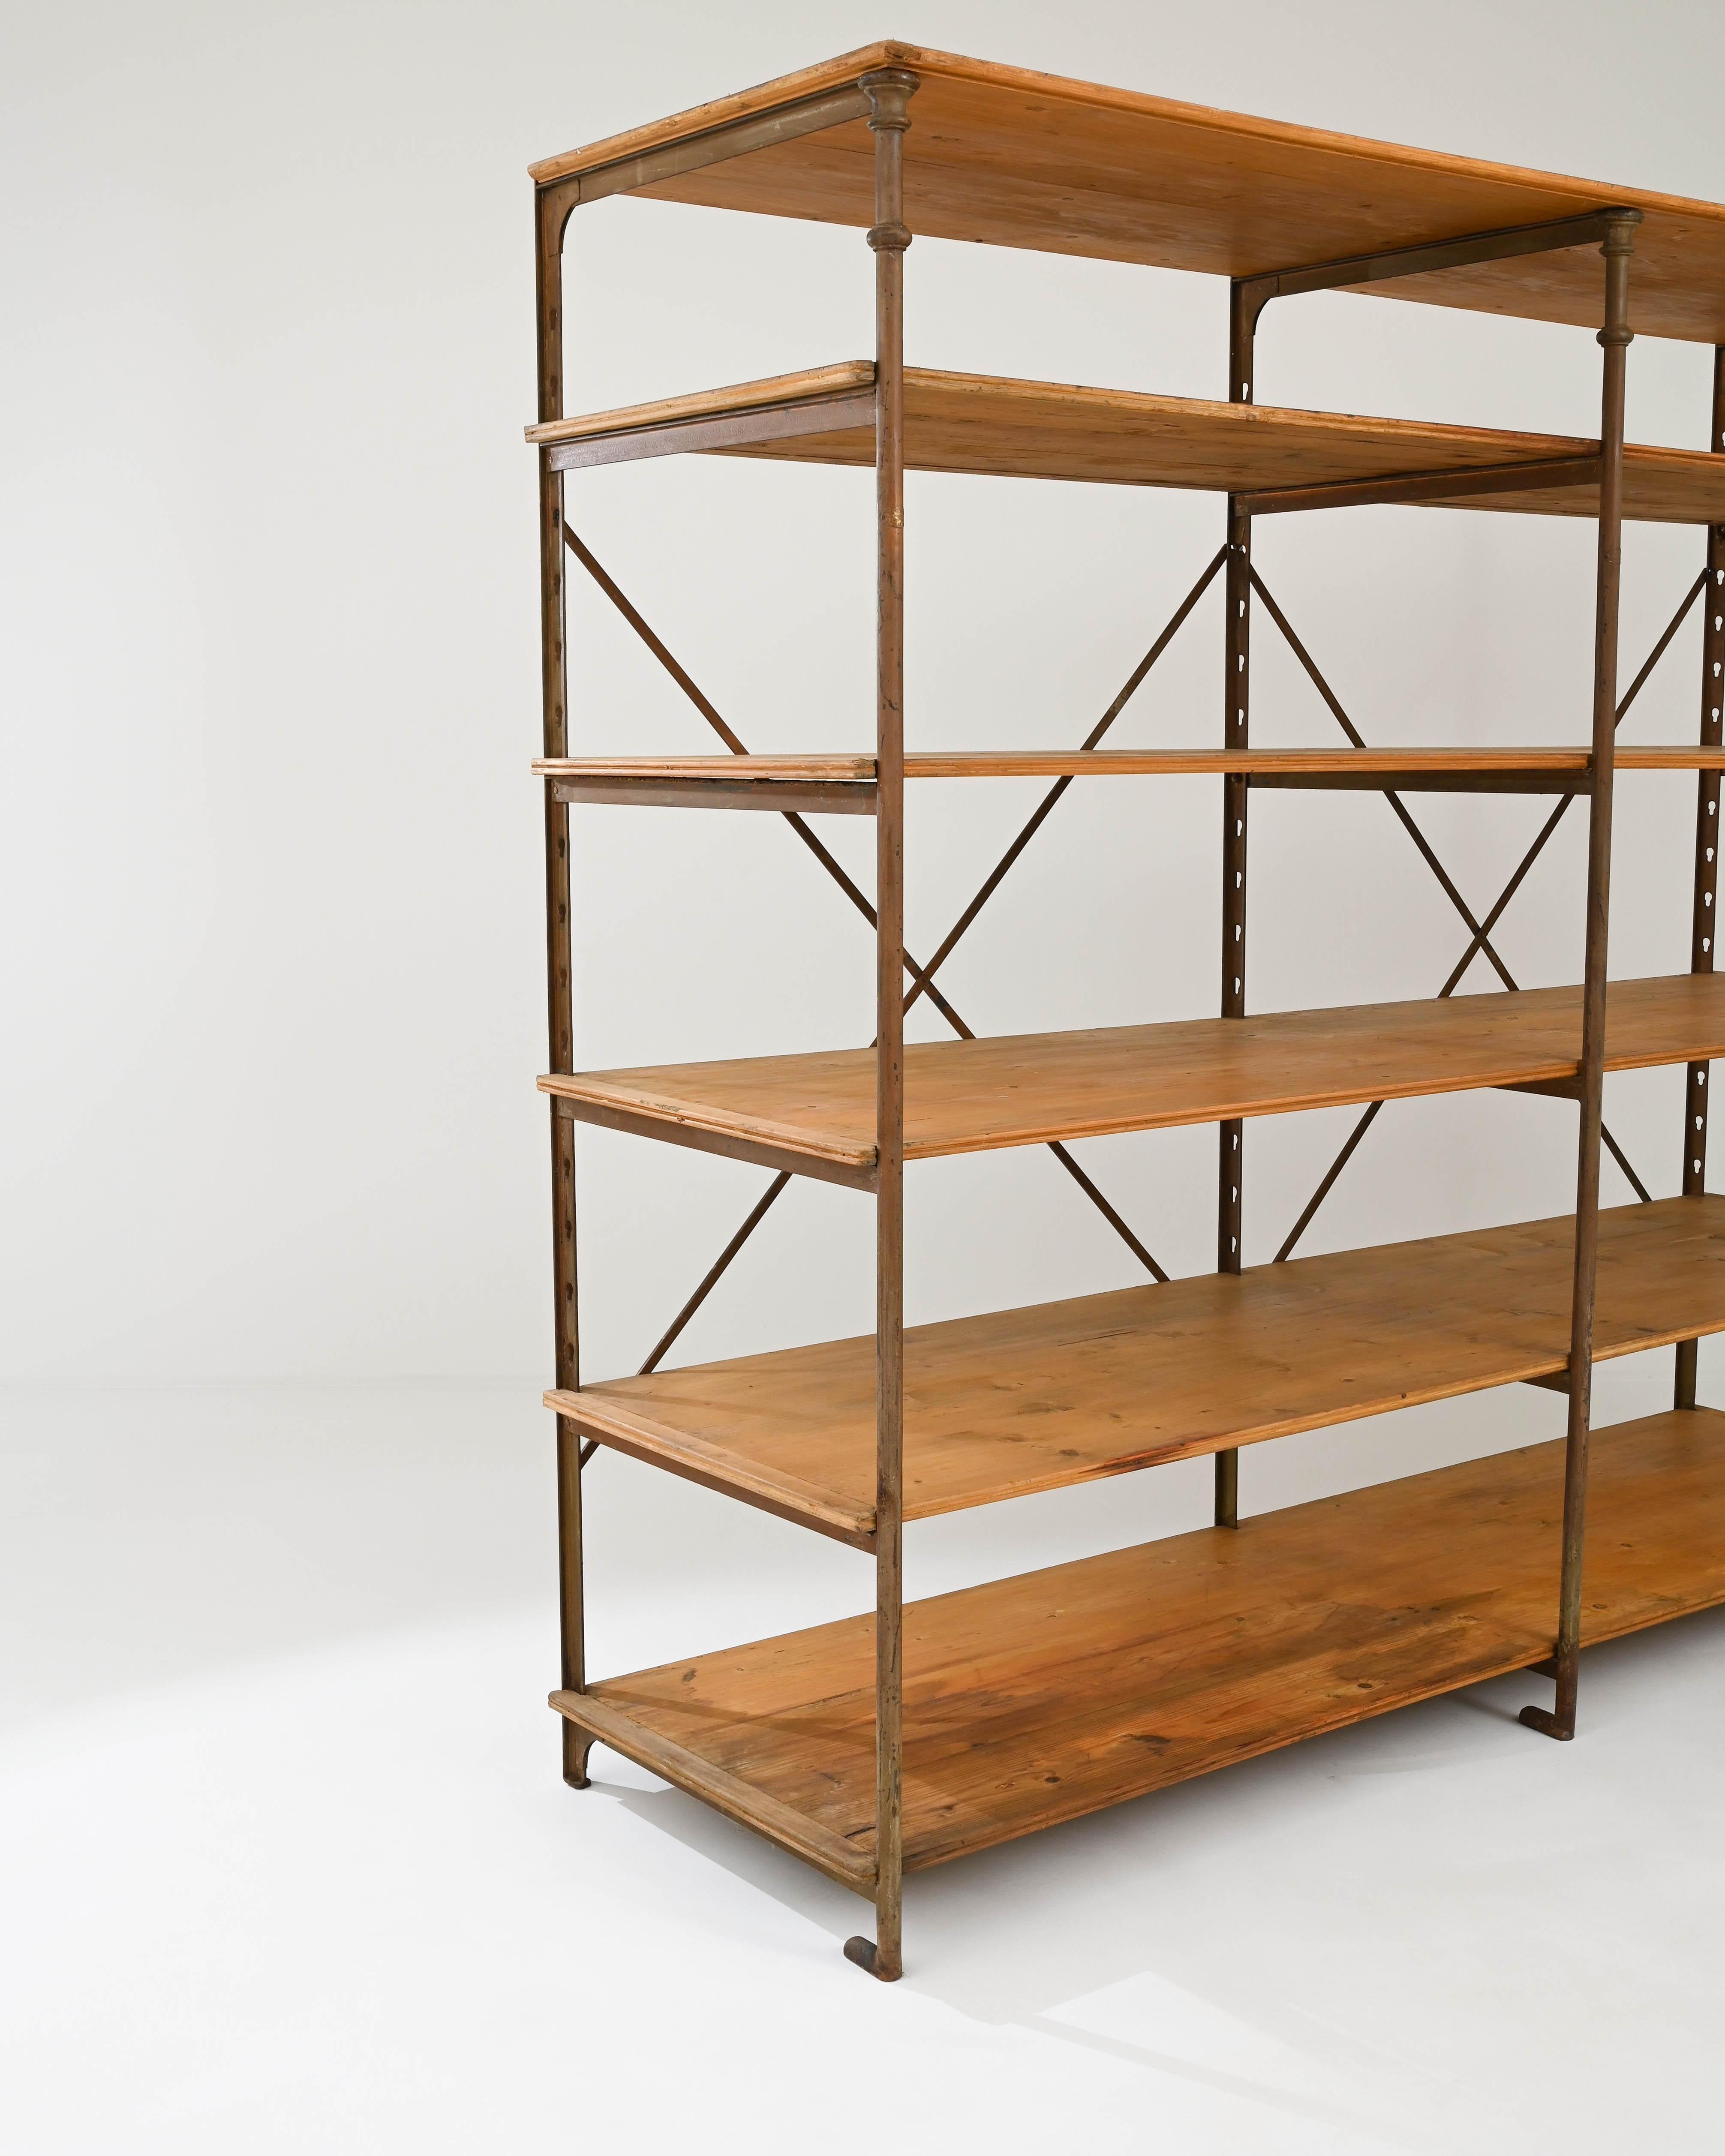 Turn of the Century Parisian Industrial Shelving by Theodore Scherf 1